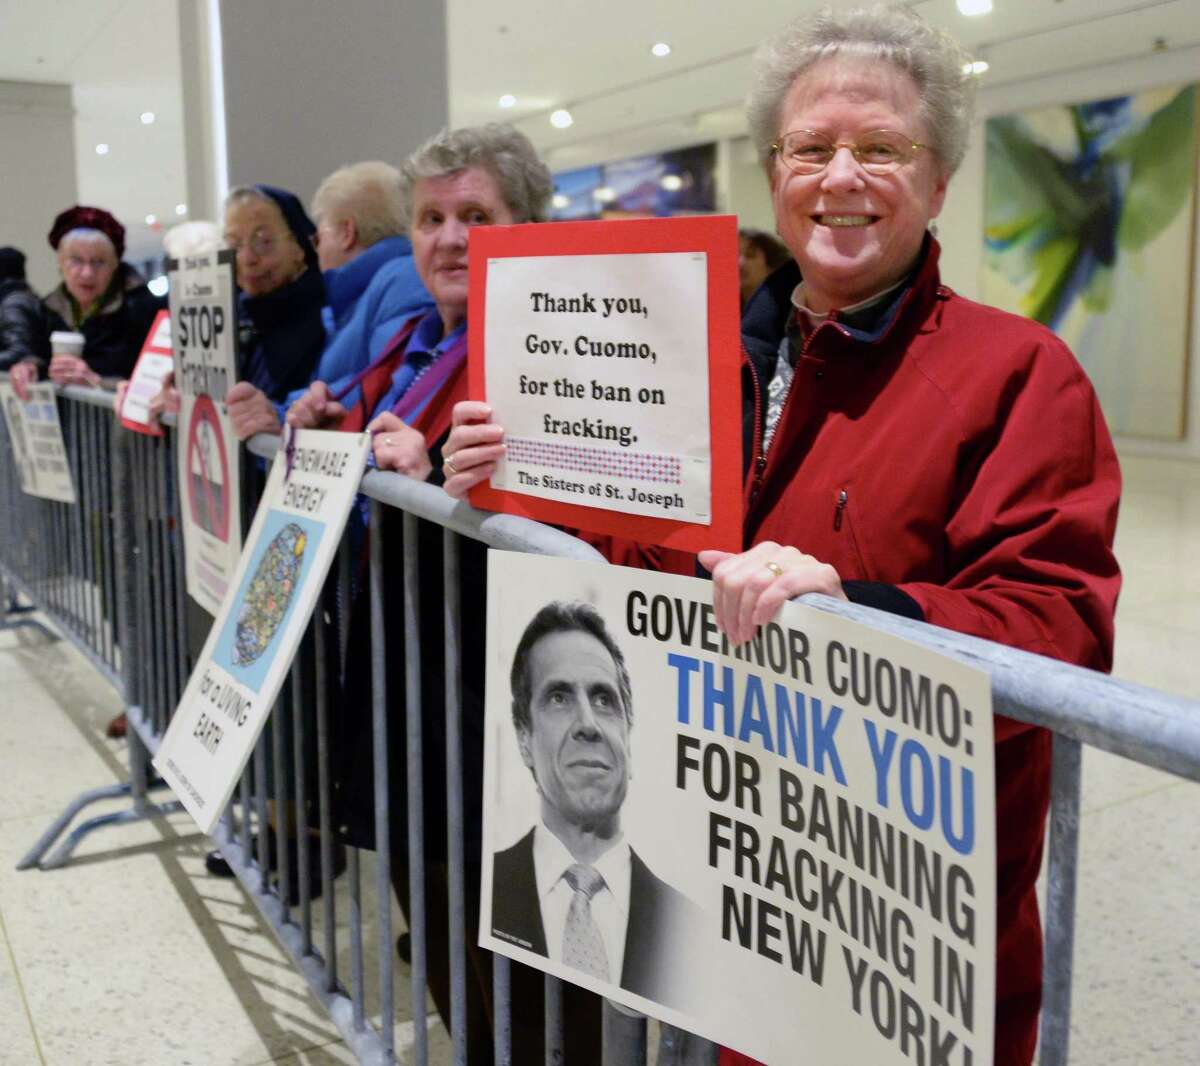 Sister Charla Whipple of Latham joins a celebratory rally thanking Gov. Andrew Cuomo for banning fracking outside State of the State address and budget proposal at Empire State Plaza Convention Center Wednesday January 21, 2015 in Albany, NY. (John Carl D'Annibale / Times Union)